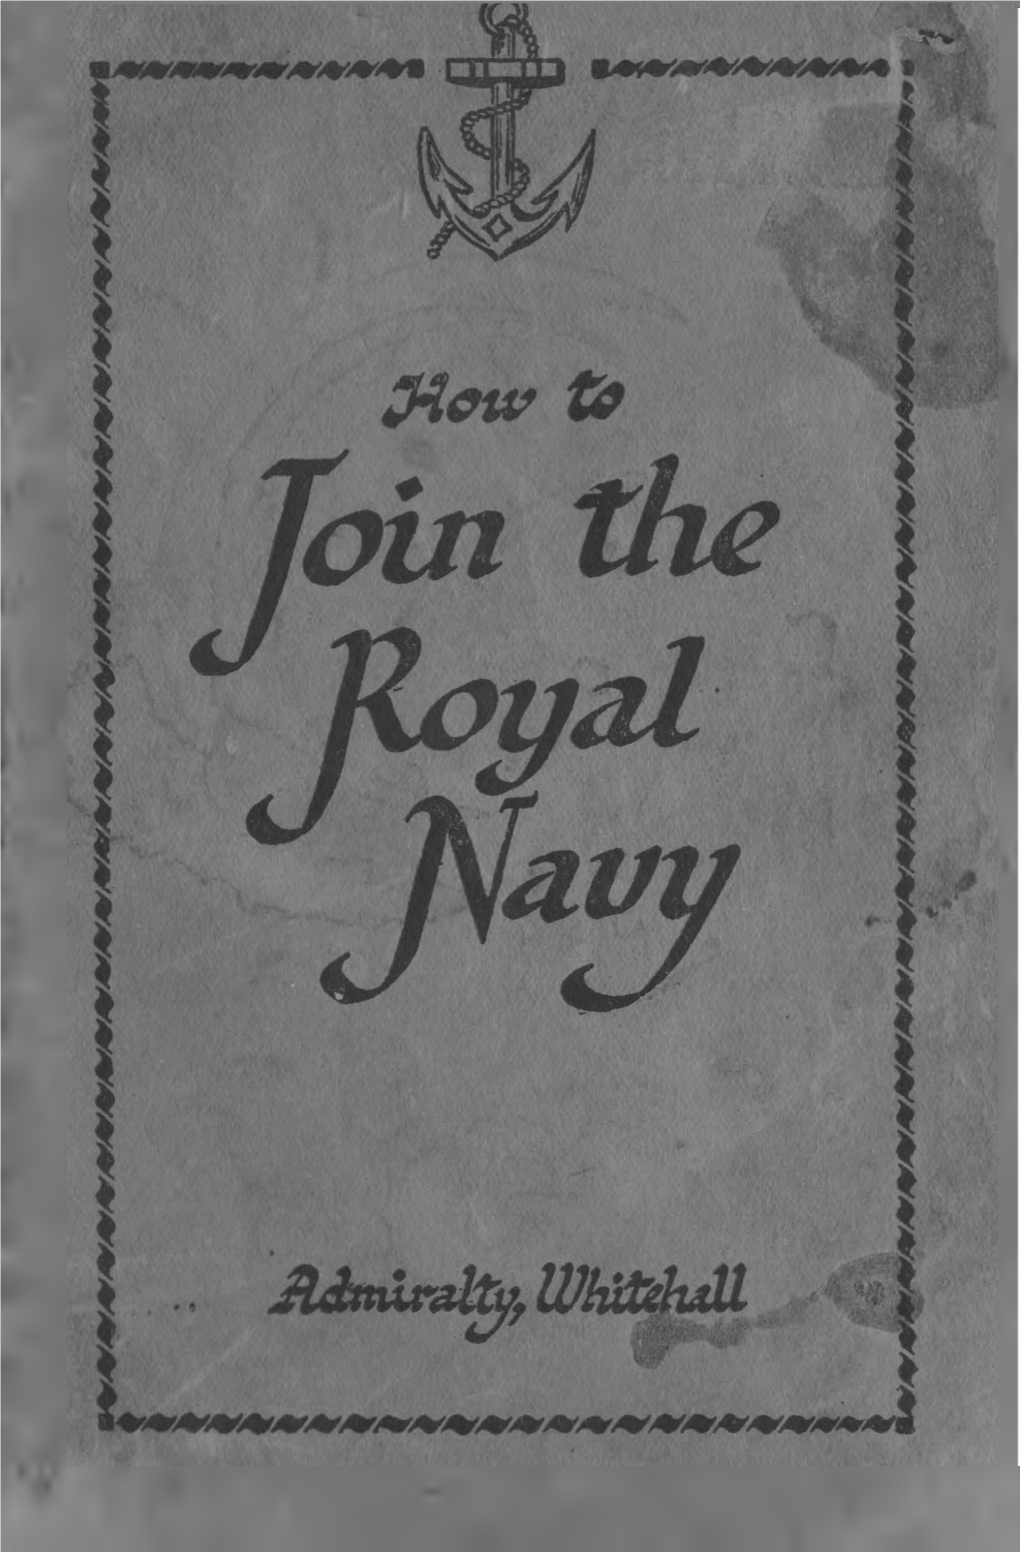 How to Join the Royal Navy